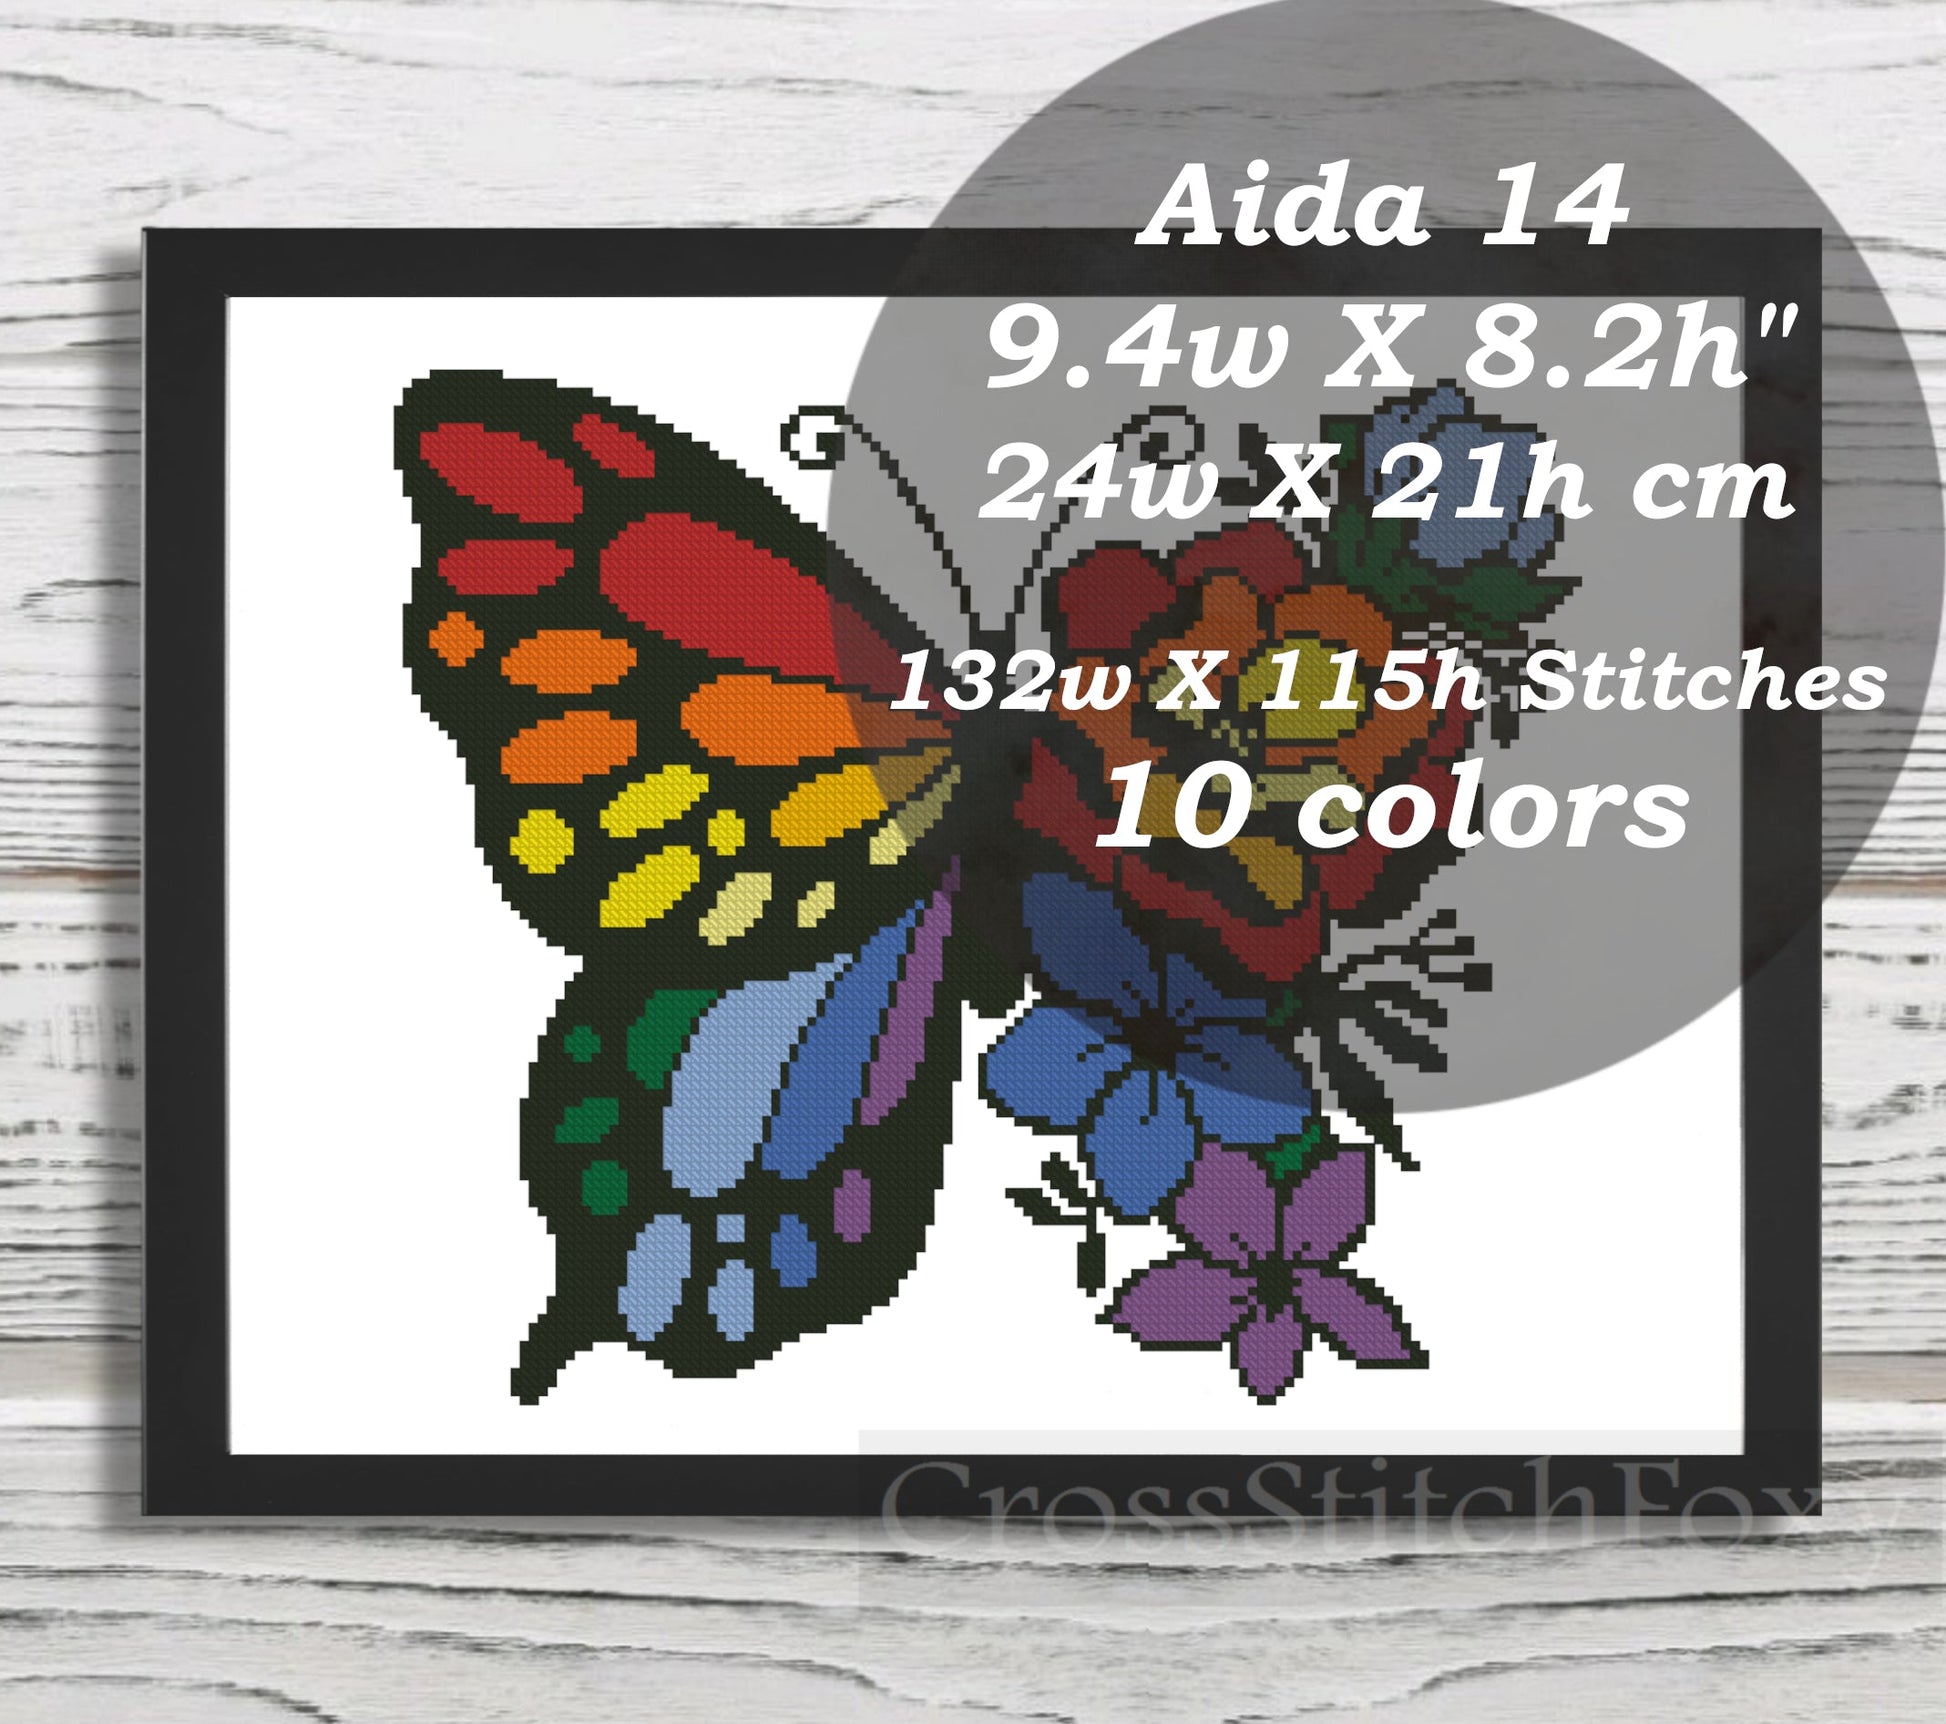 Rainbow Floral Butterfly cross stitch pattern